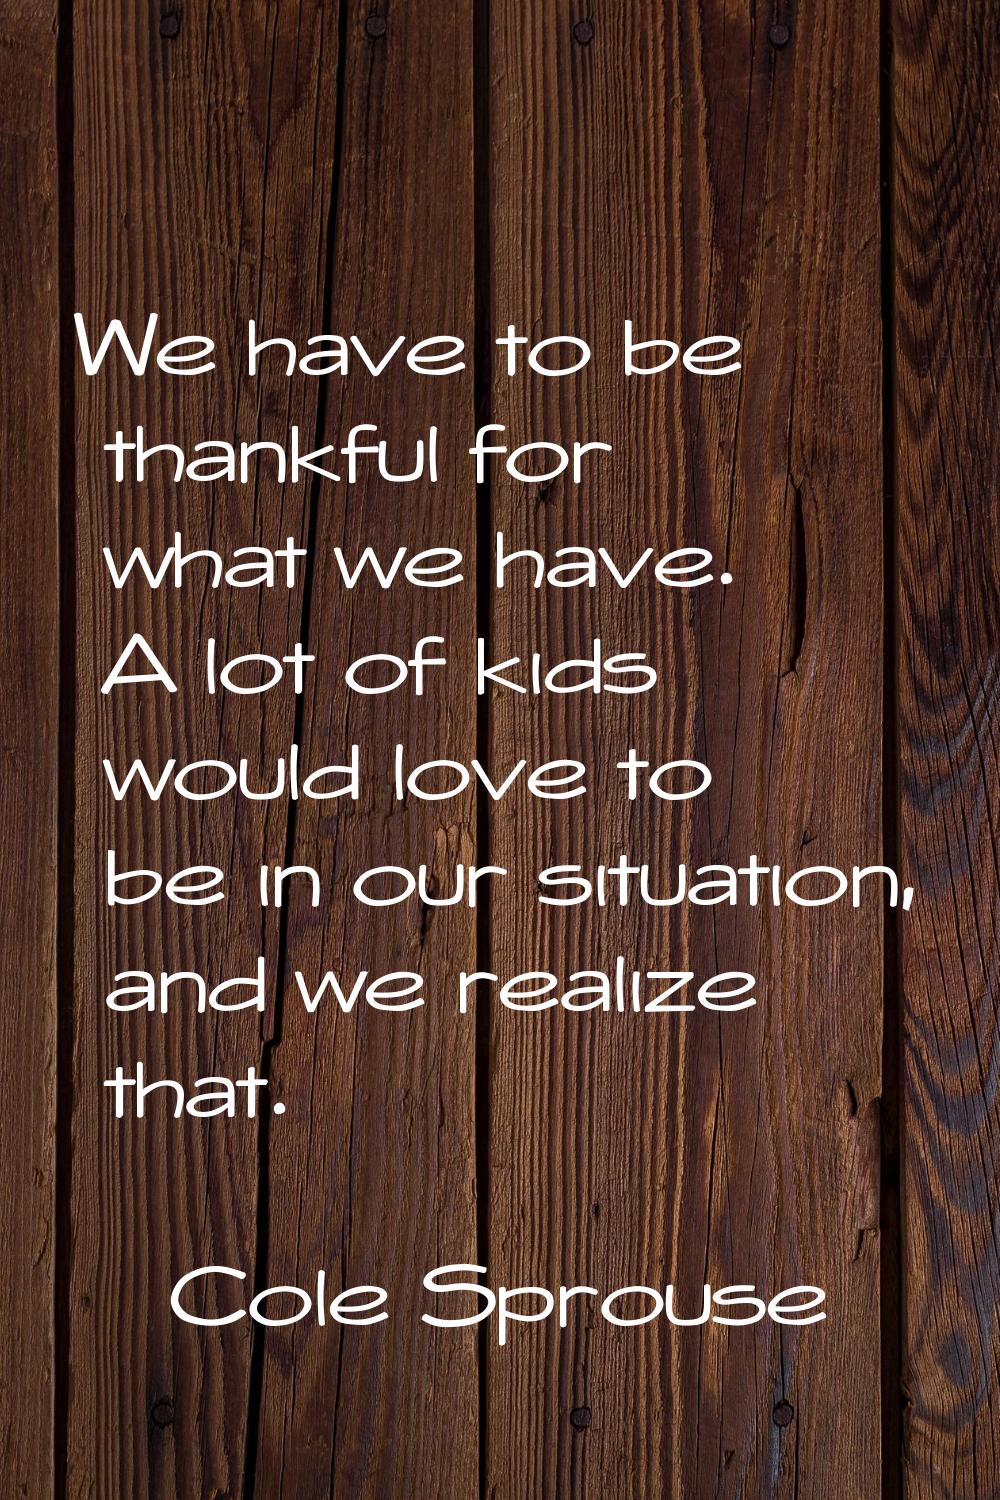 We have to be thankful for what we have. A lot of kids would love to be in our situation, and we re